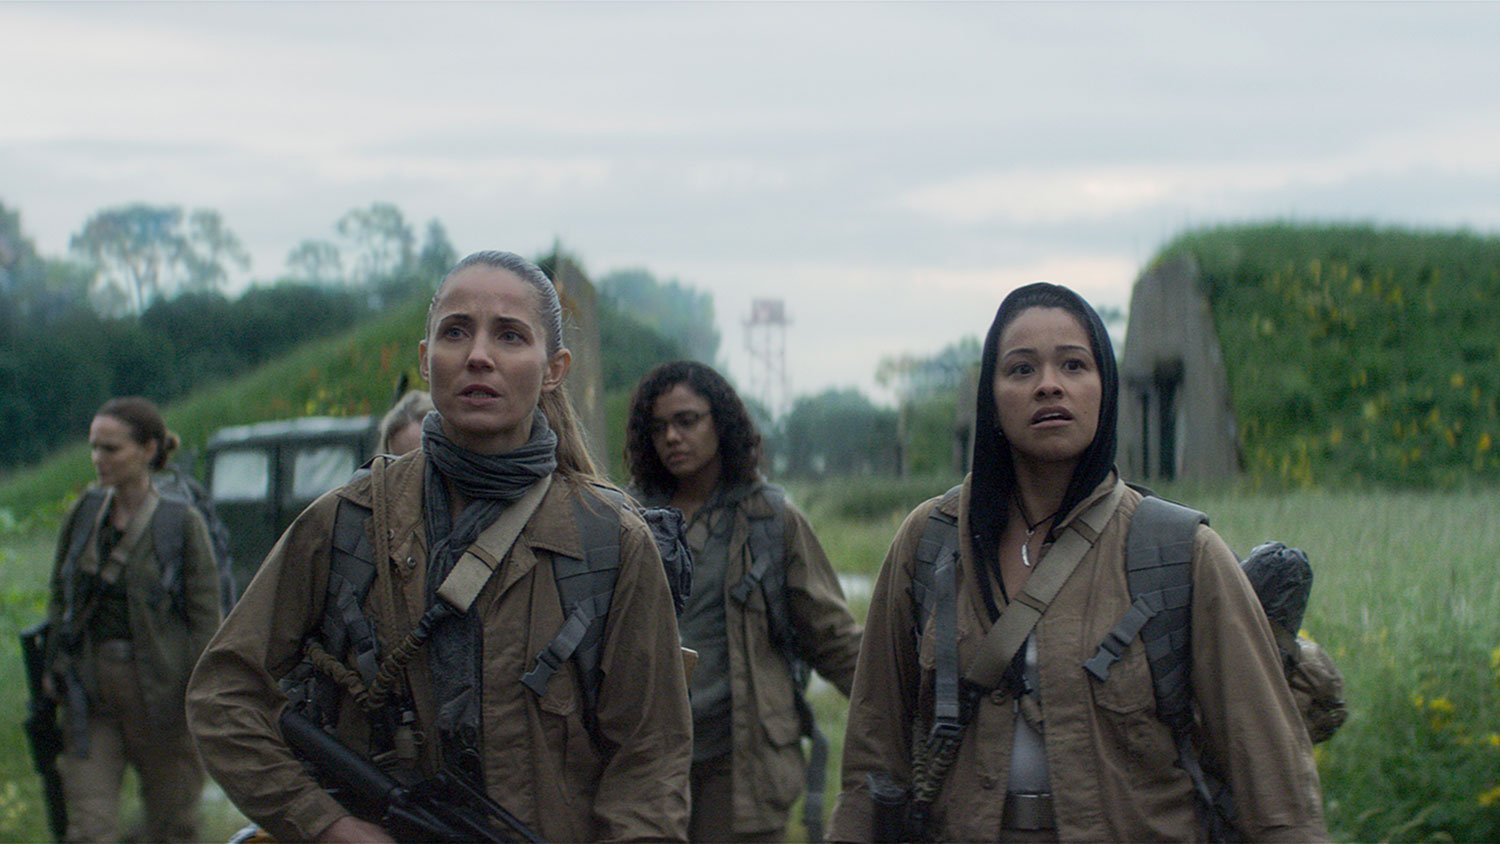 The cast of Annihilation.